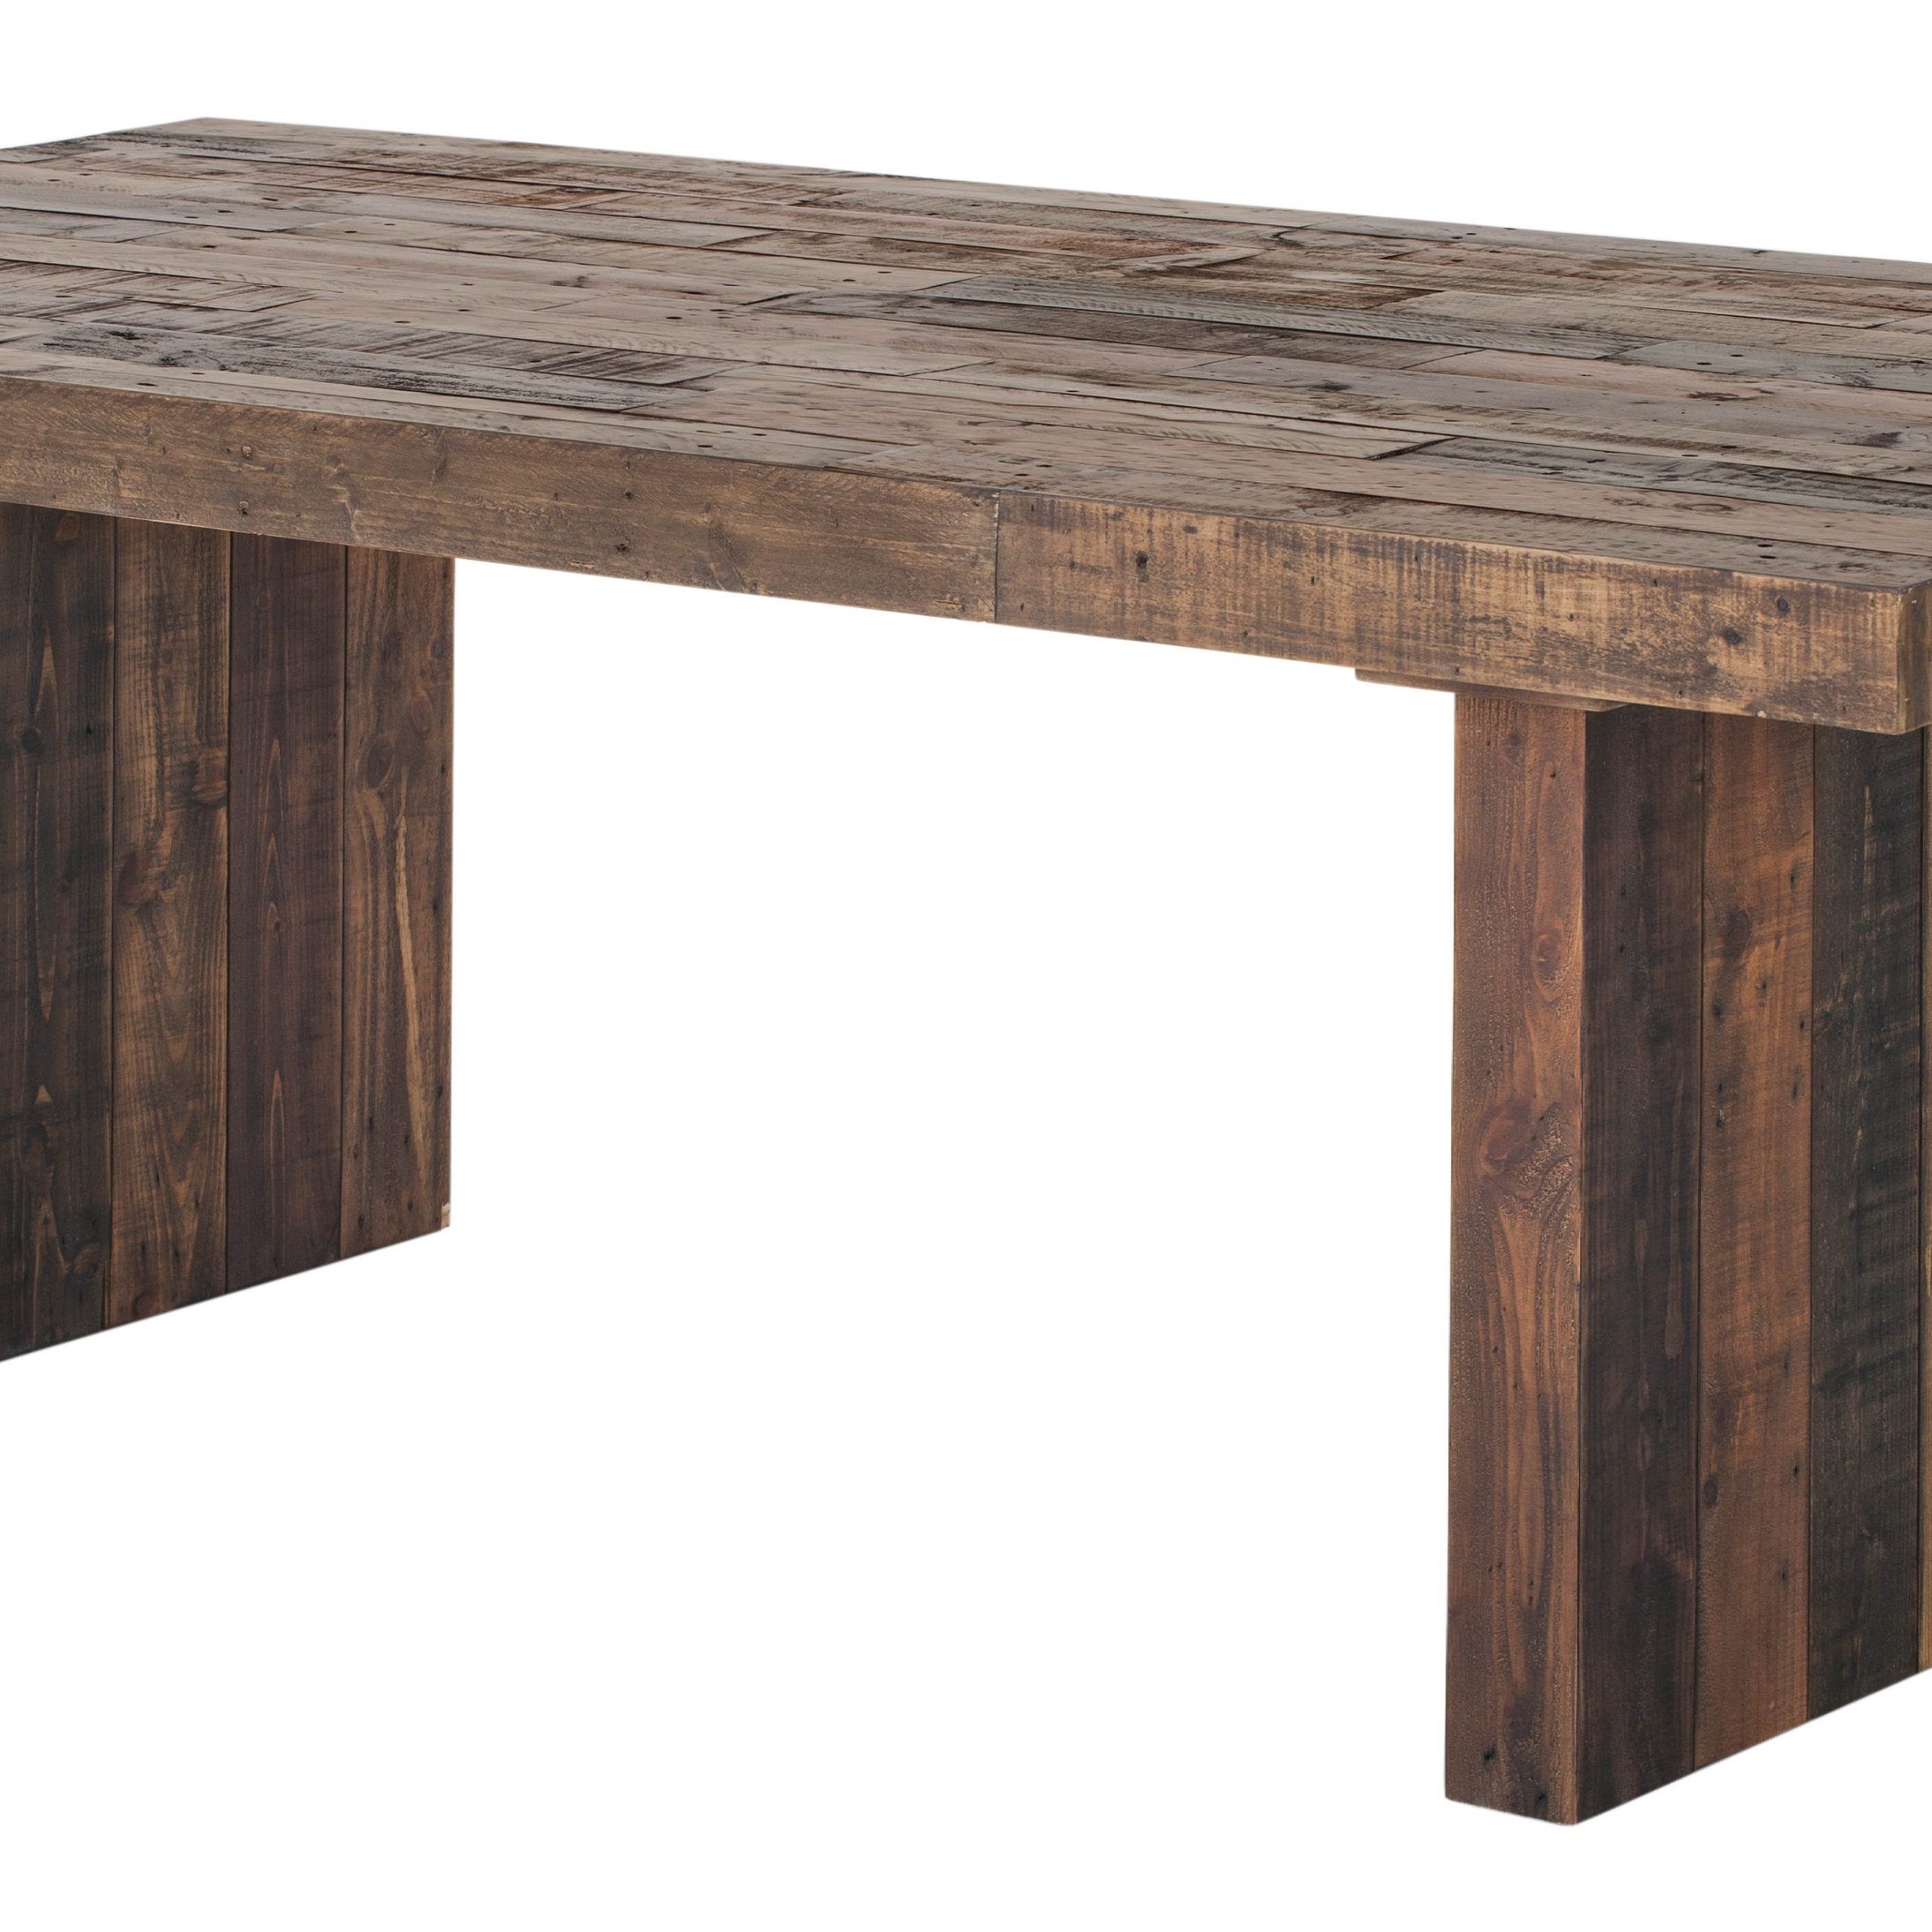 The Intended For Well Liked Small Dining Tables With Rustic Pine Ash Brown Finish (View 19 of 30)